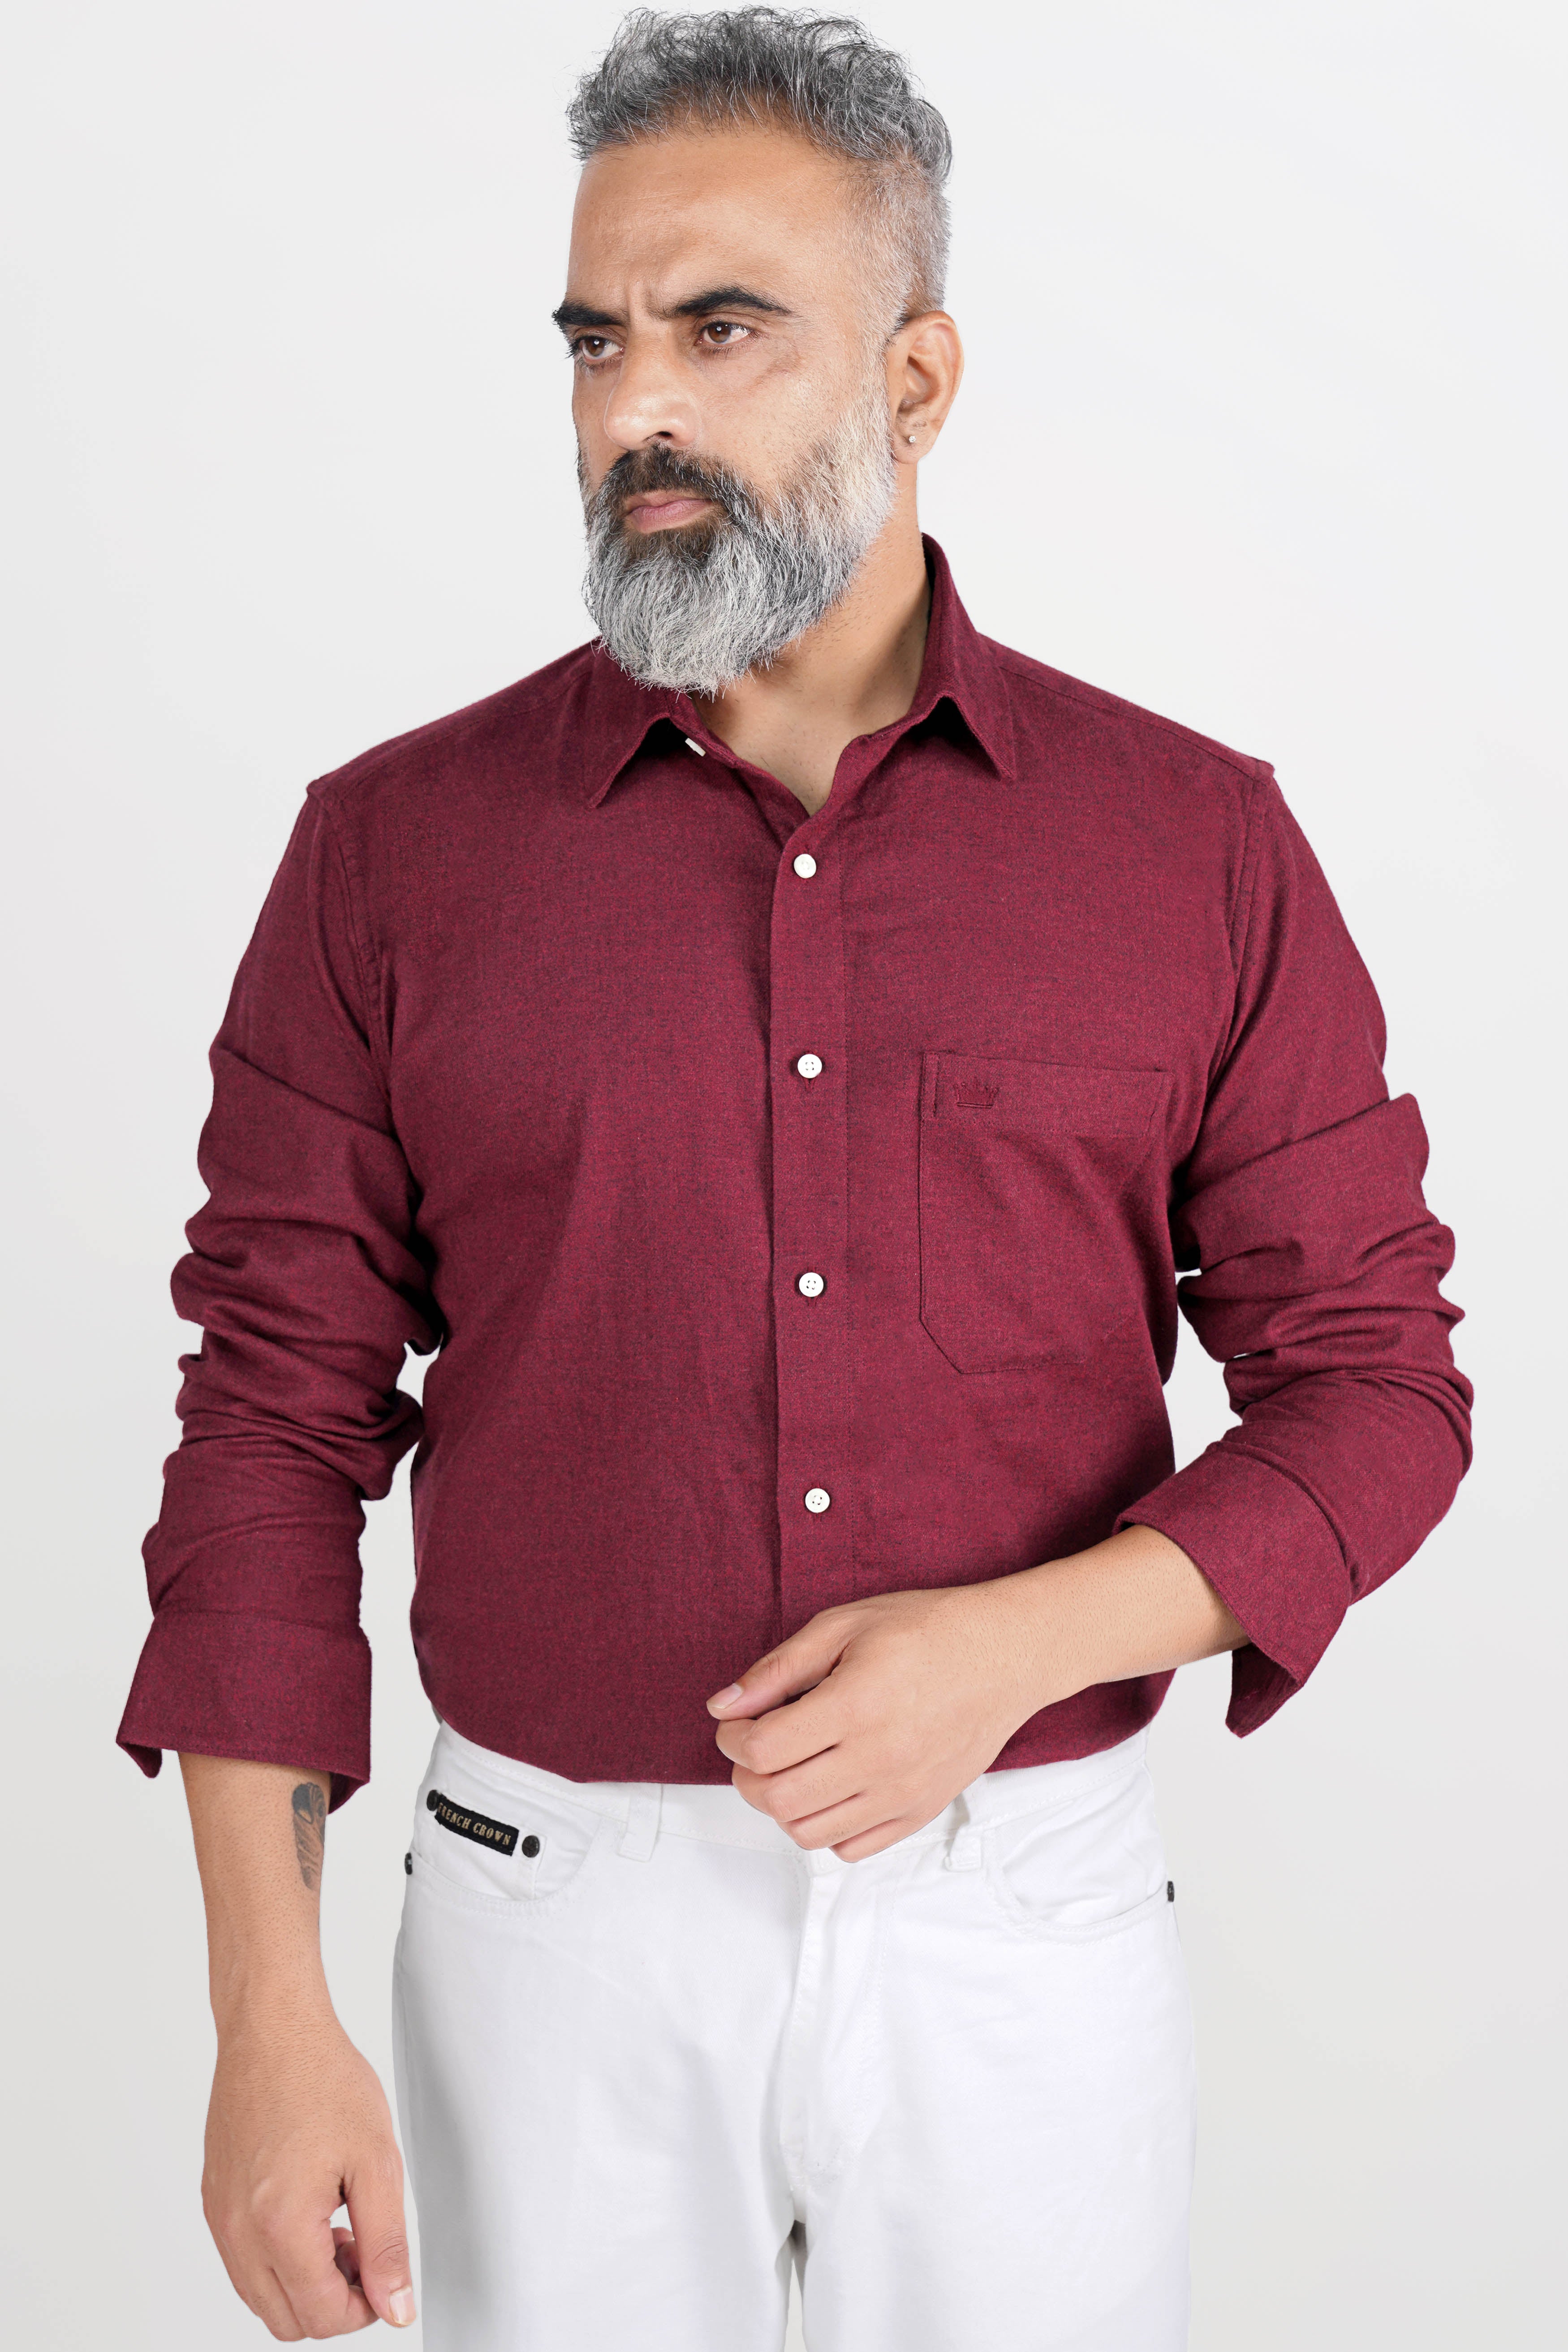 Red Polo Shirt with Blue Pants | Hockerty